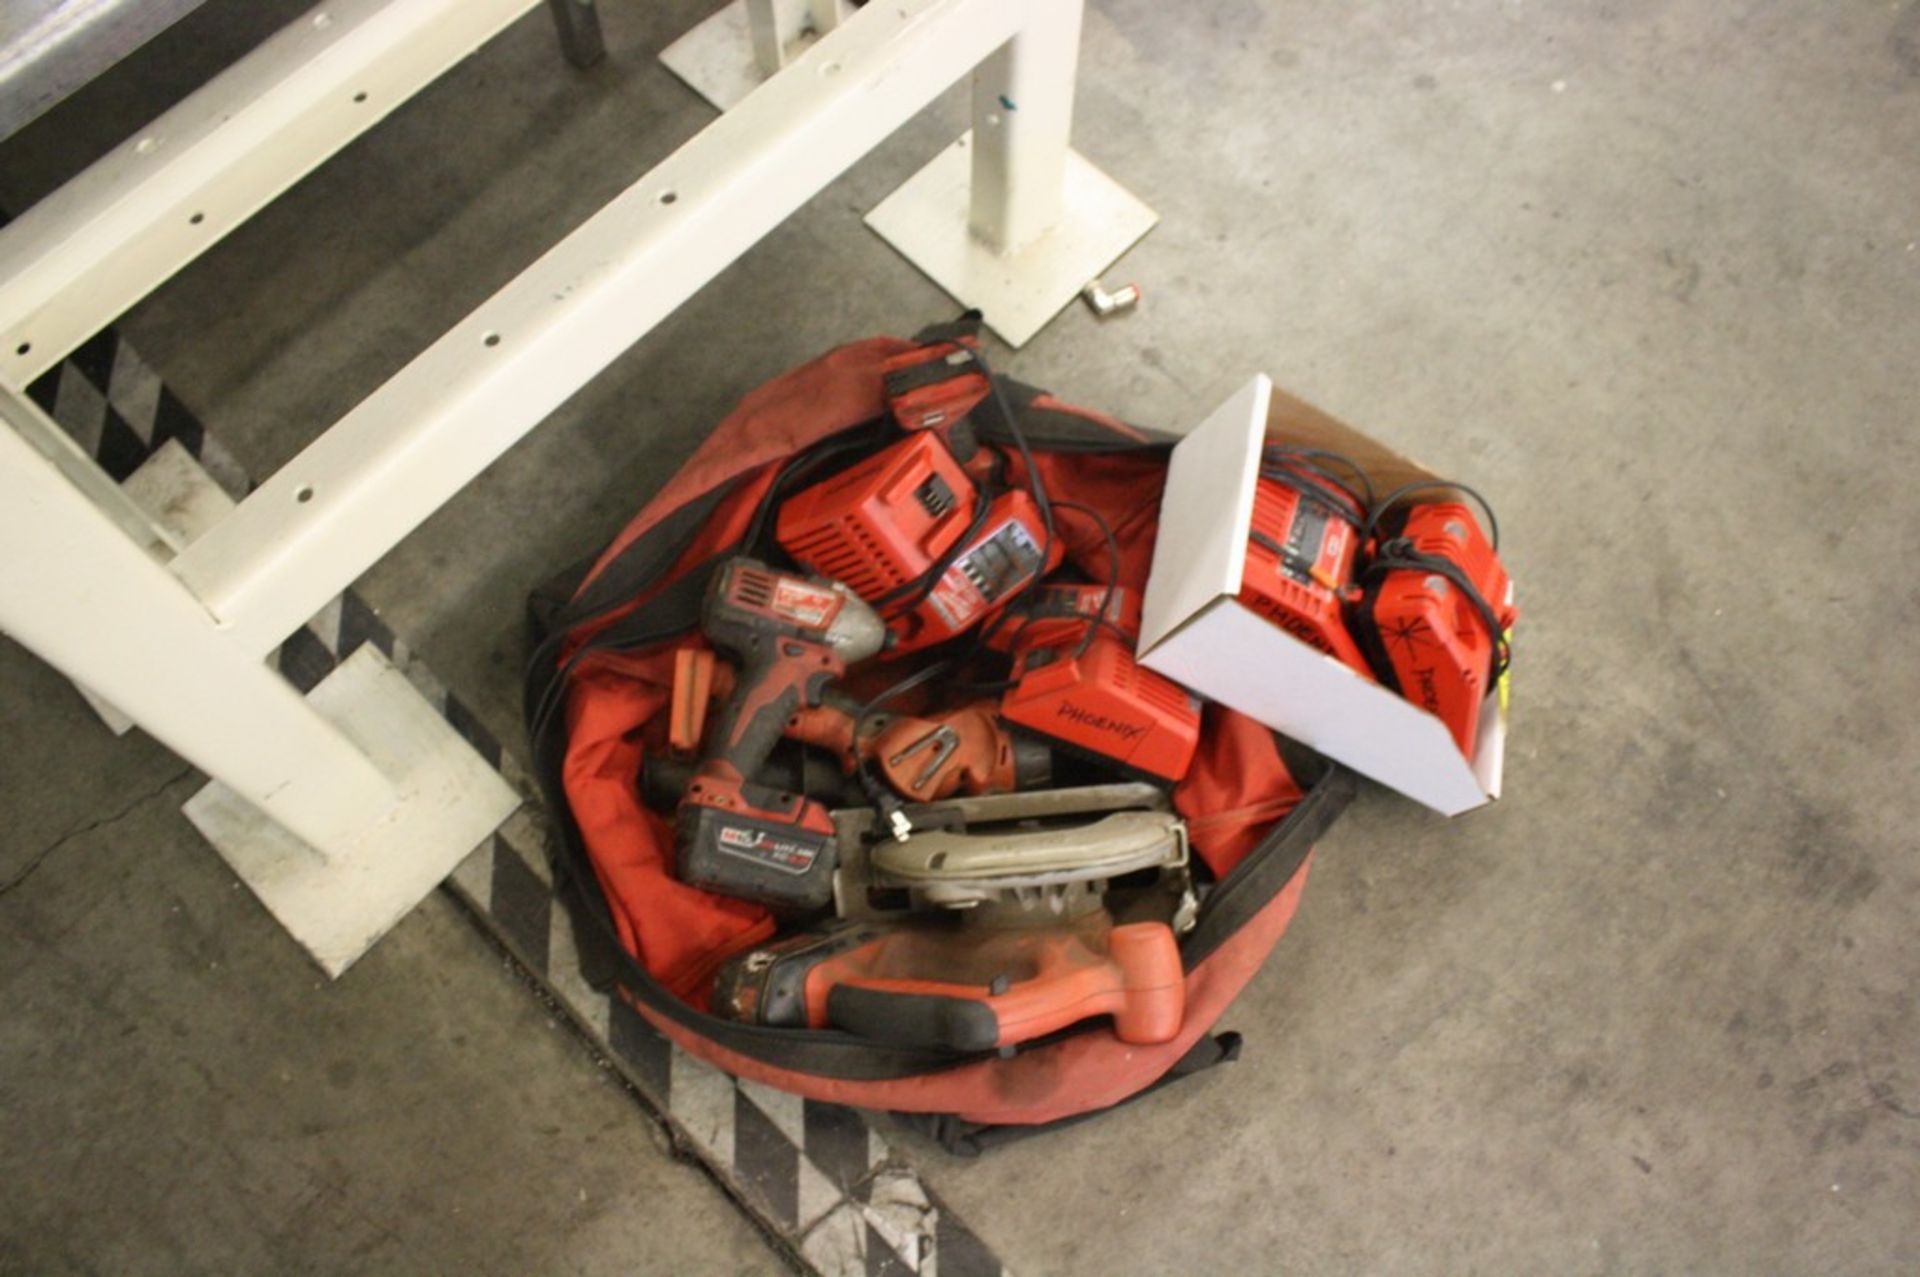 BAG OF MILWAUKEE CORDLESS TOOLS, INCLUDING CIRCULAR SAW, DRILL, FLASHLIGHT, BATTERIES AND CHARGERS